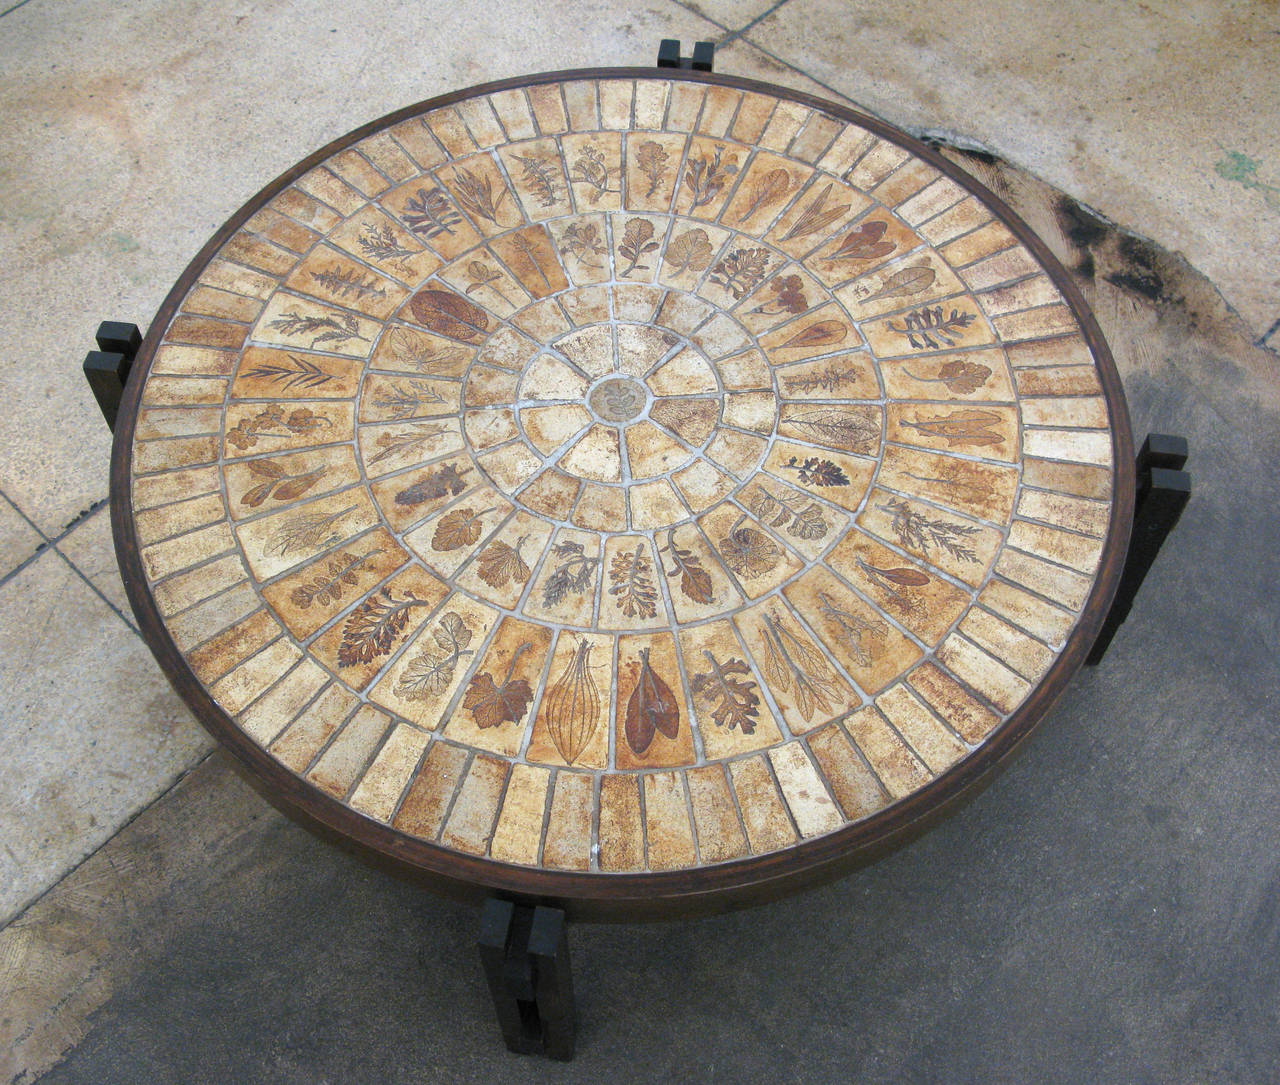 Original round ceramic coffee table from the 